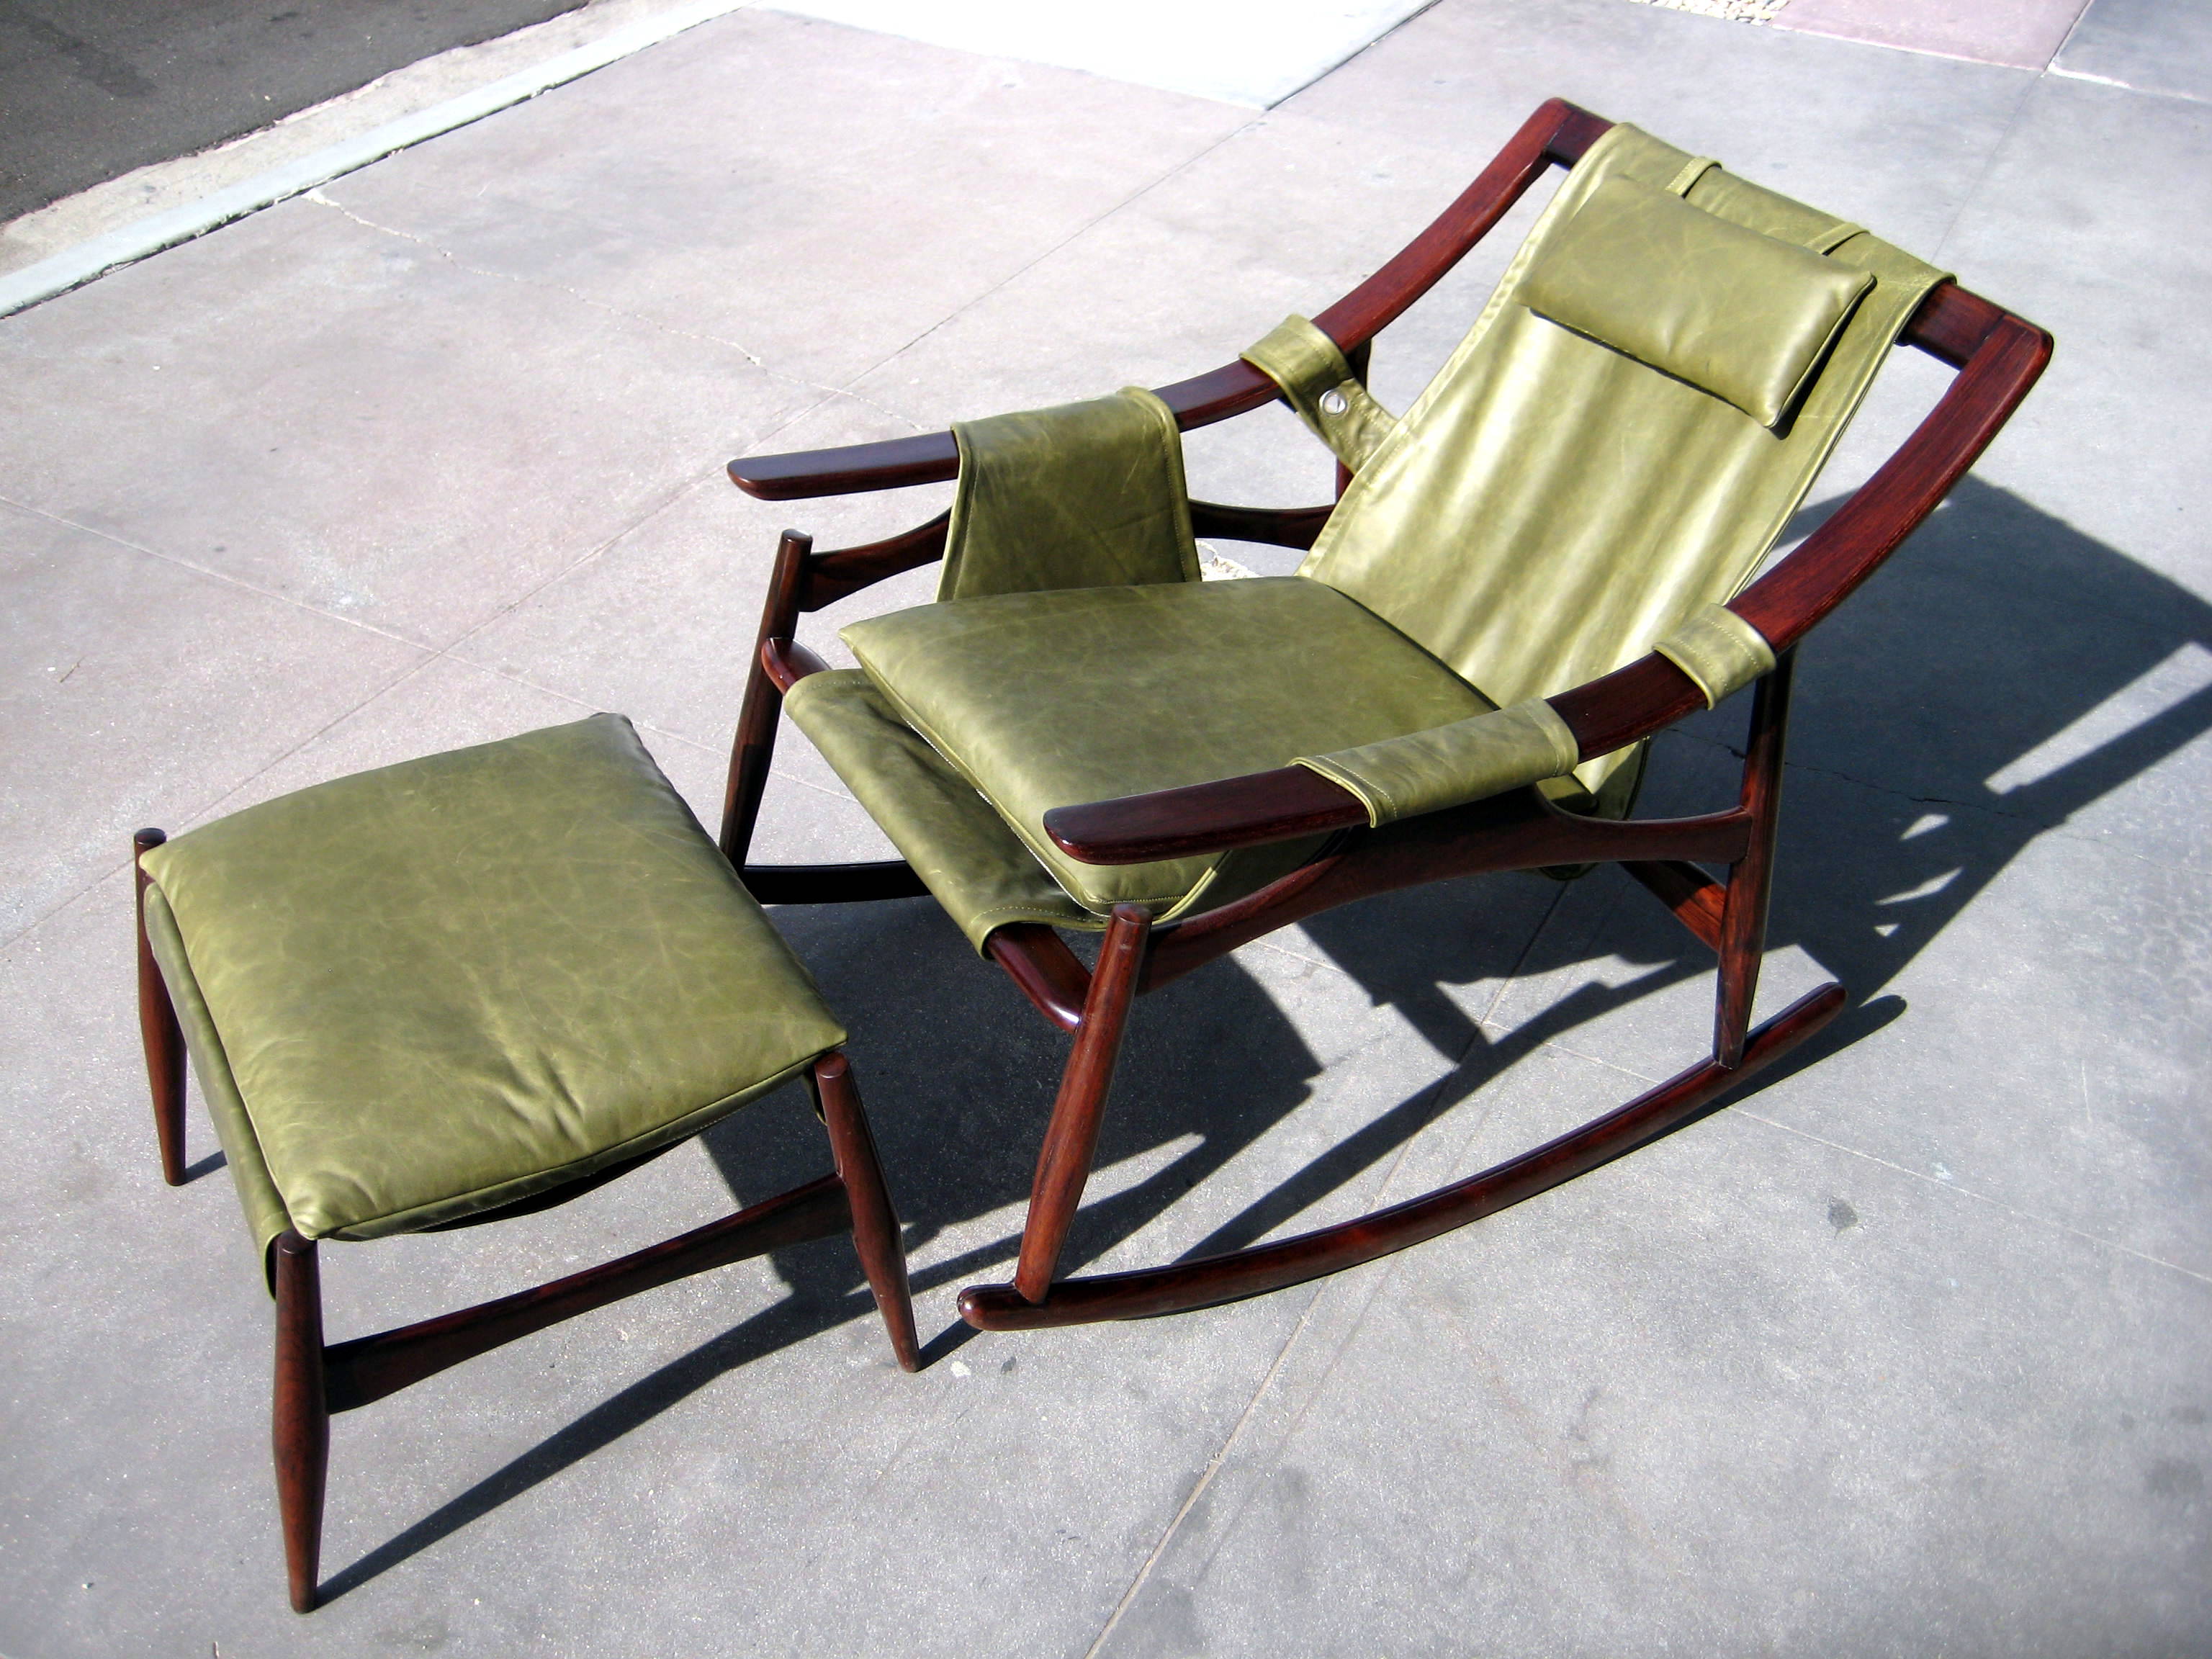 A Fine Brazilian Rosewood Rocking Chair and Ottoman. Circa 1960s